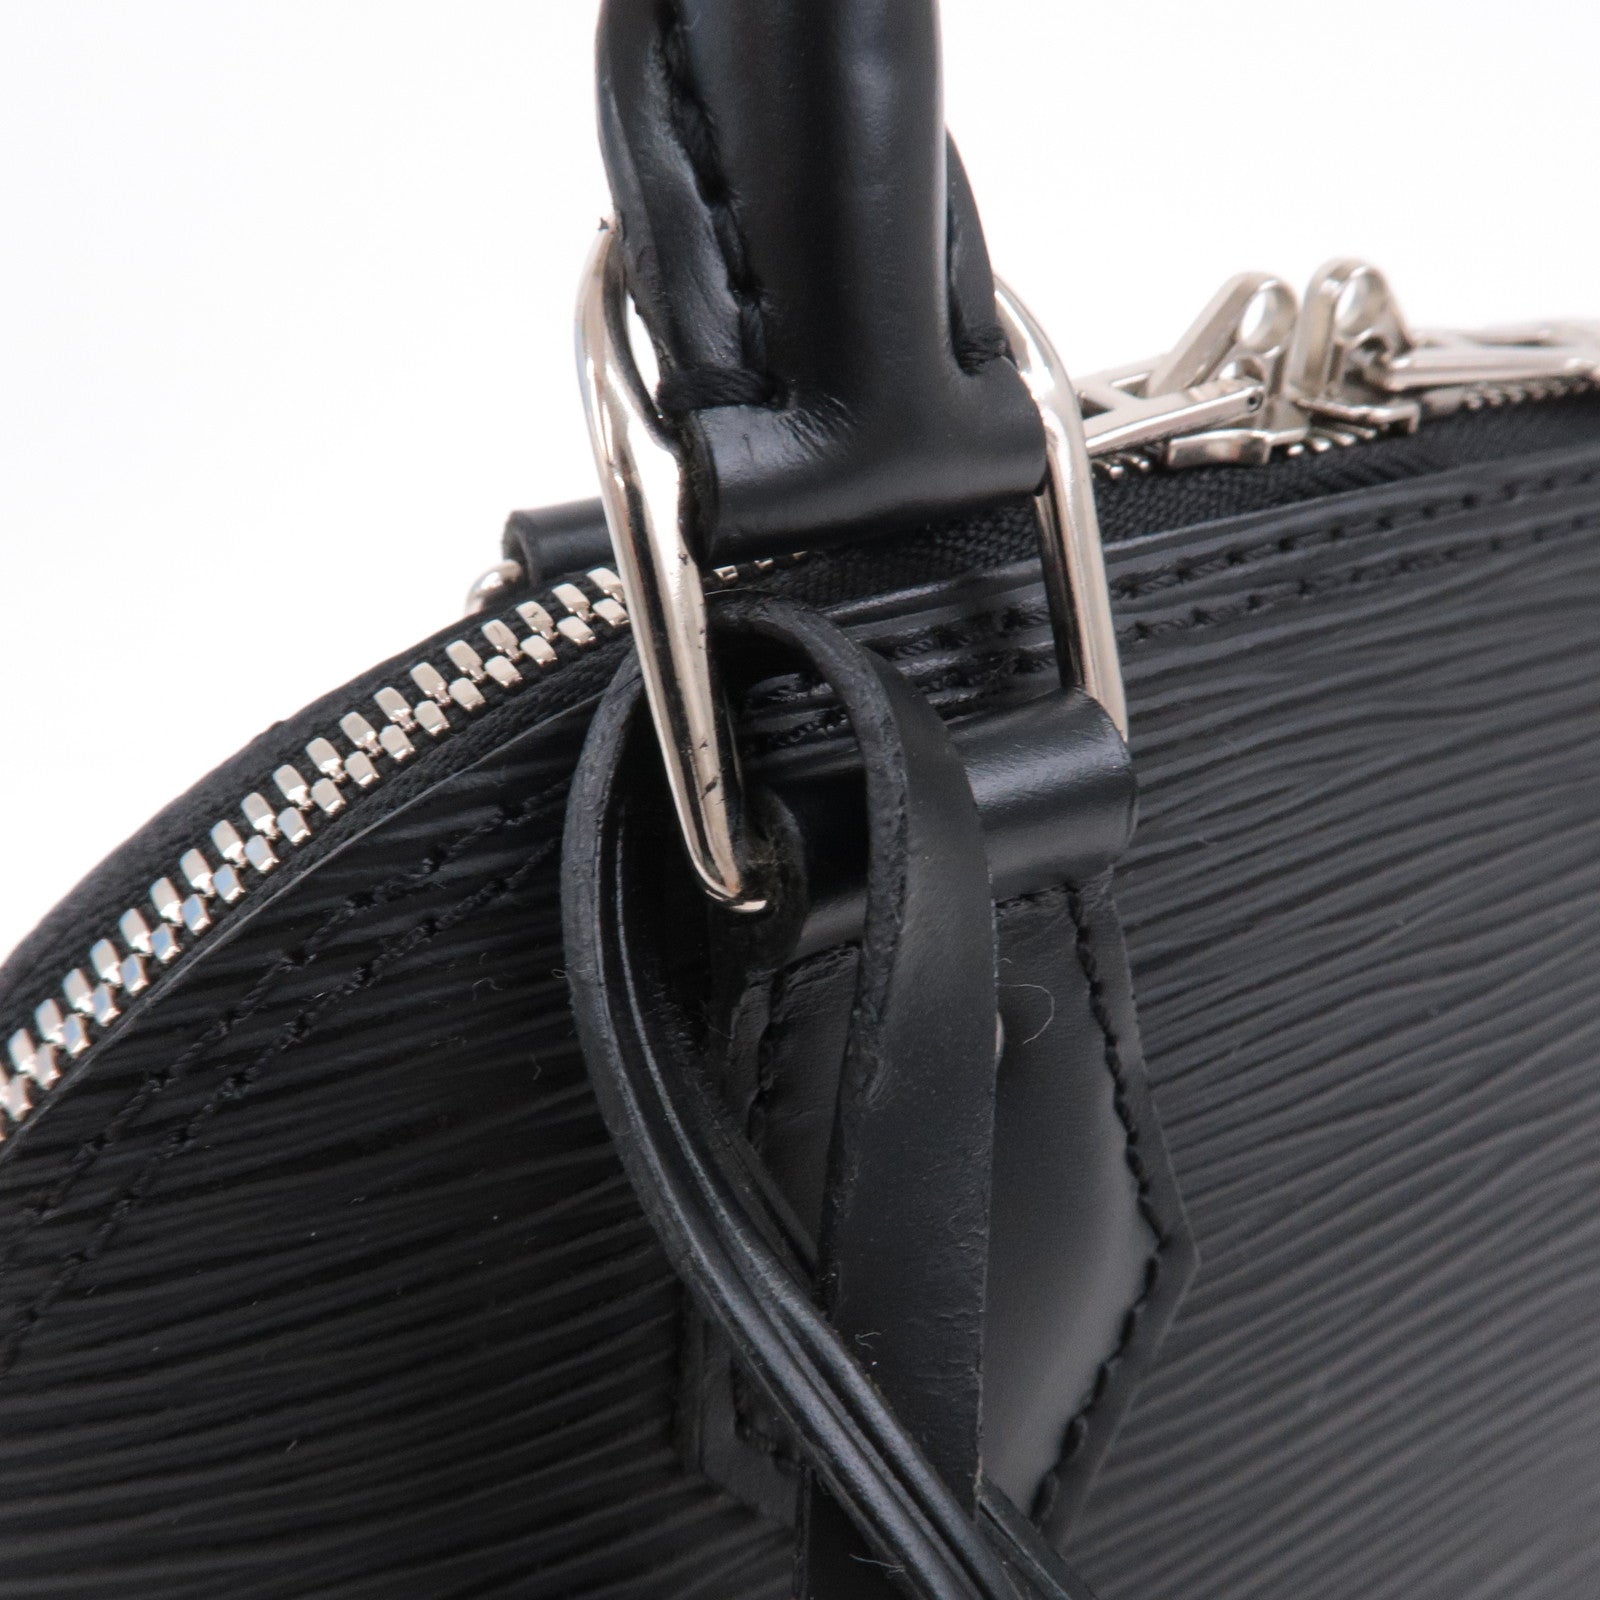 LOUIS VUITTON - Alma MM bag in epi leather and black …